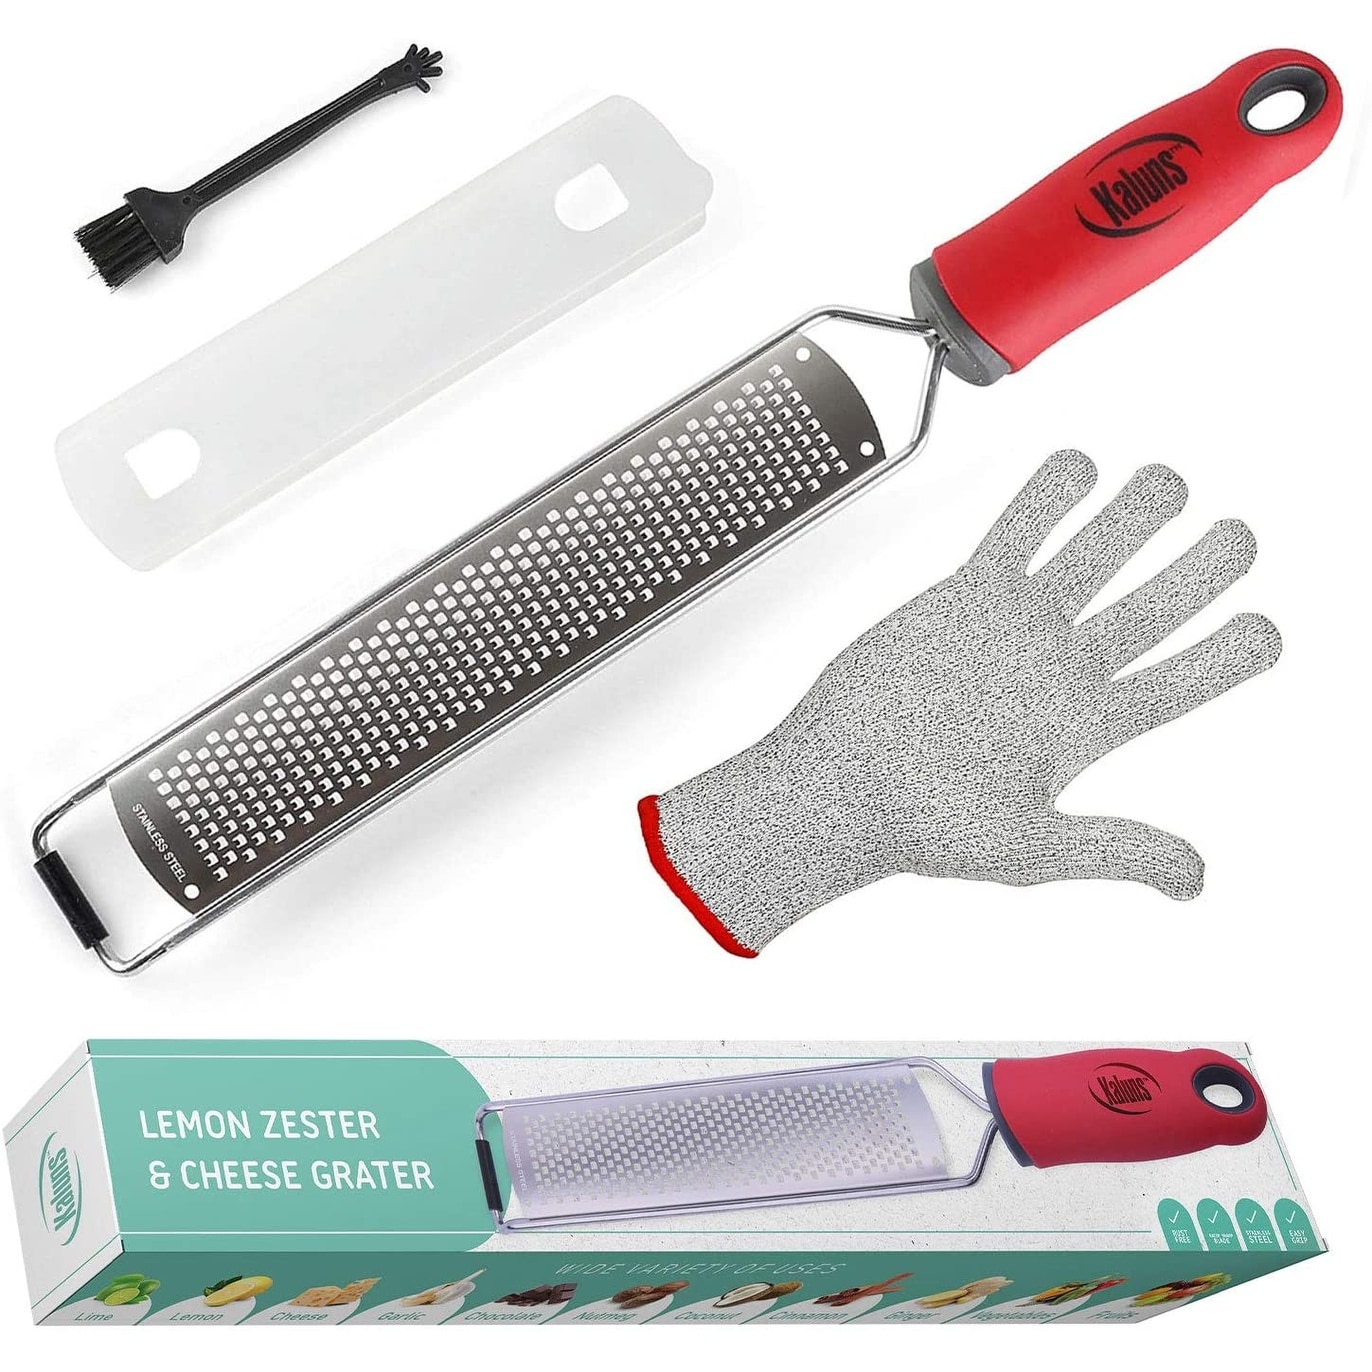 https://ak1.ostkcdn.com/images/products/is/images/direct/4c7baf476feed4021fcead4fa47914692fb9ccfe/Lemon-Zester-and-Cheese-Grater.jpg